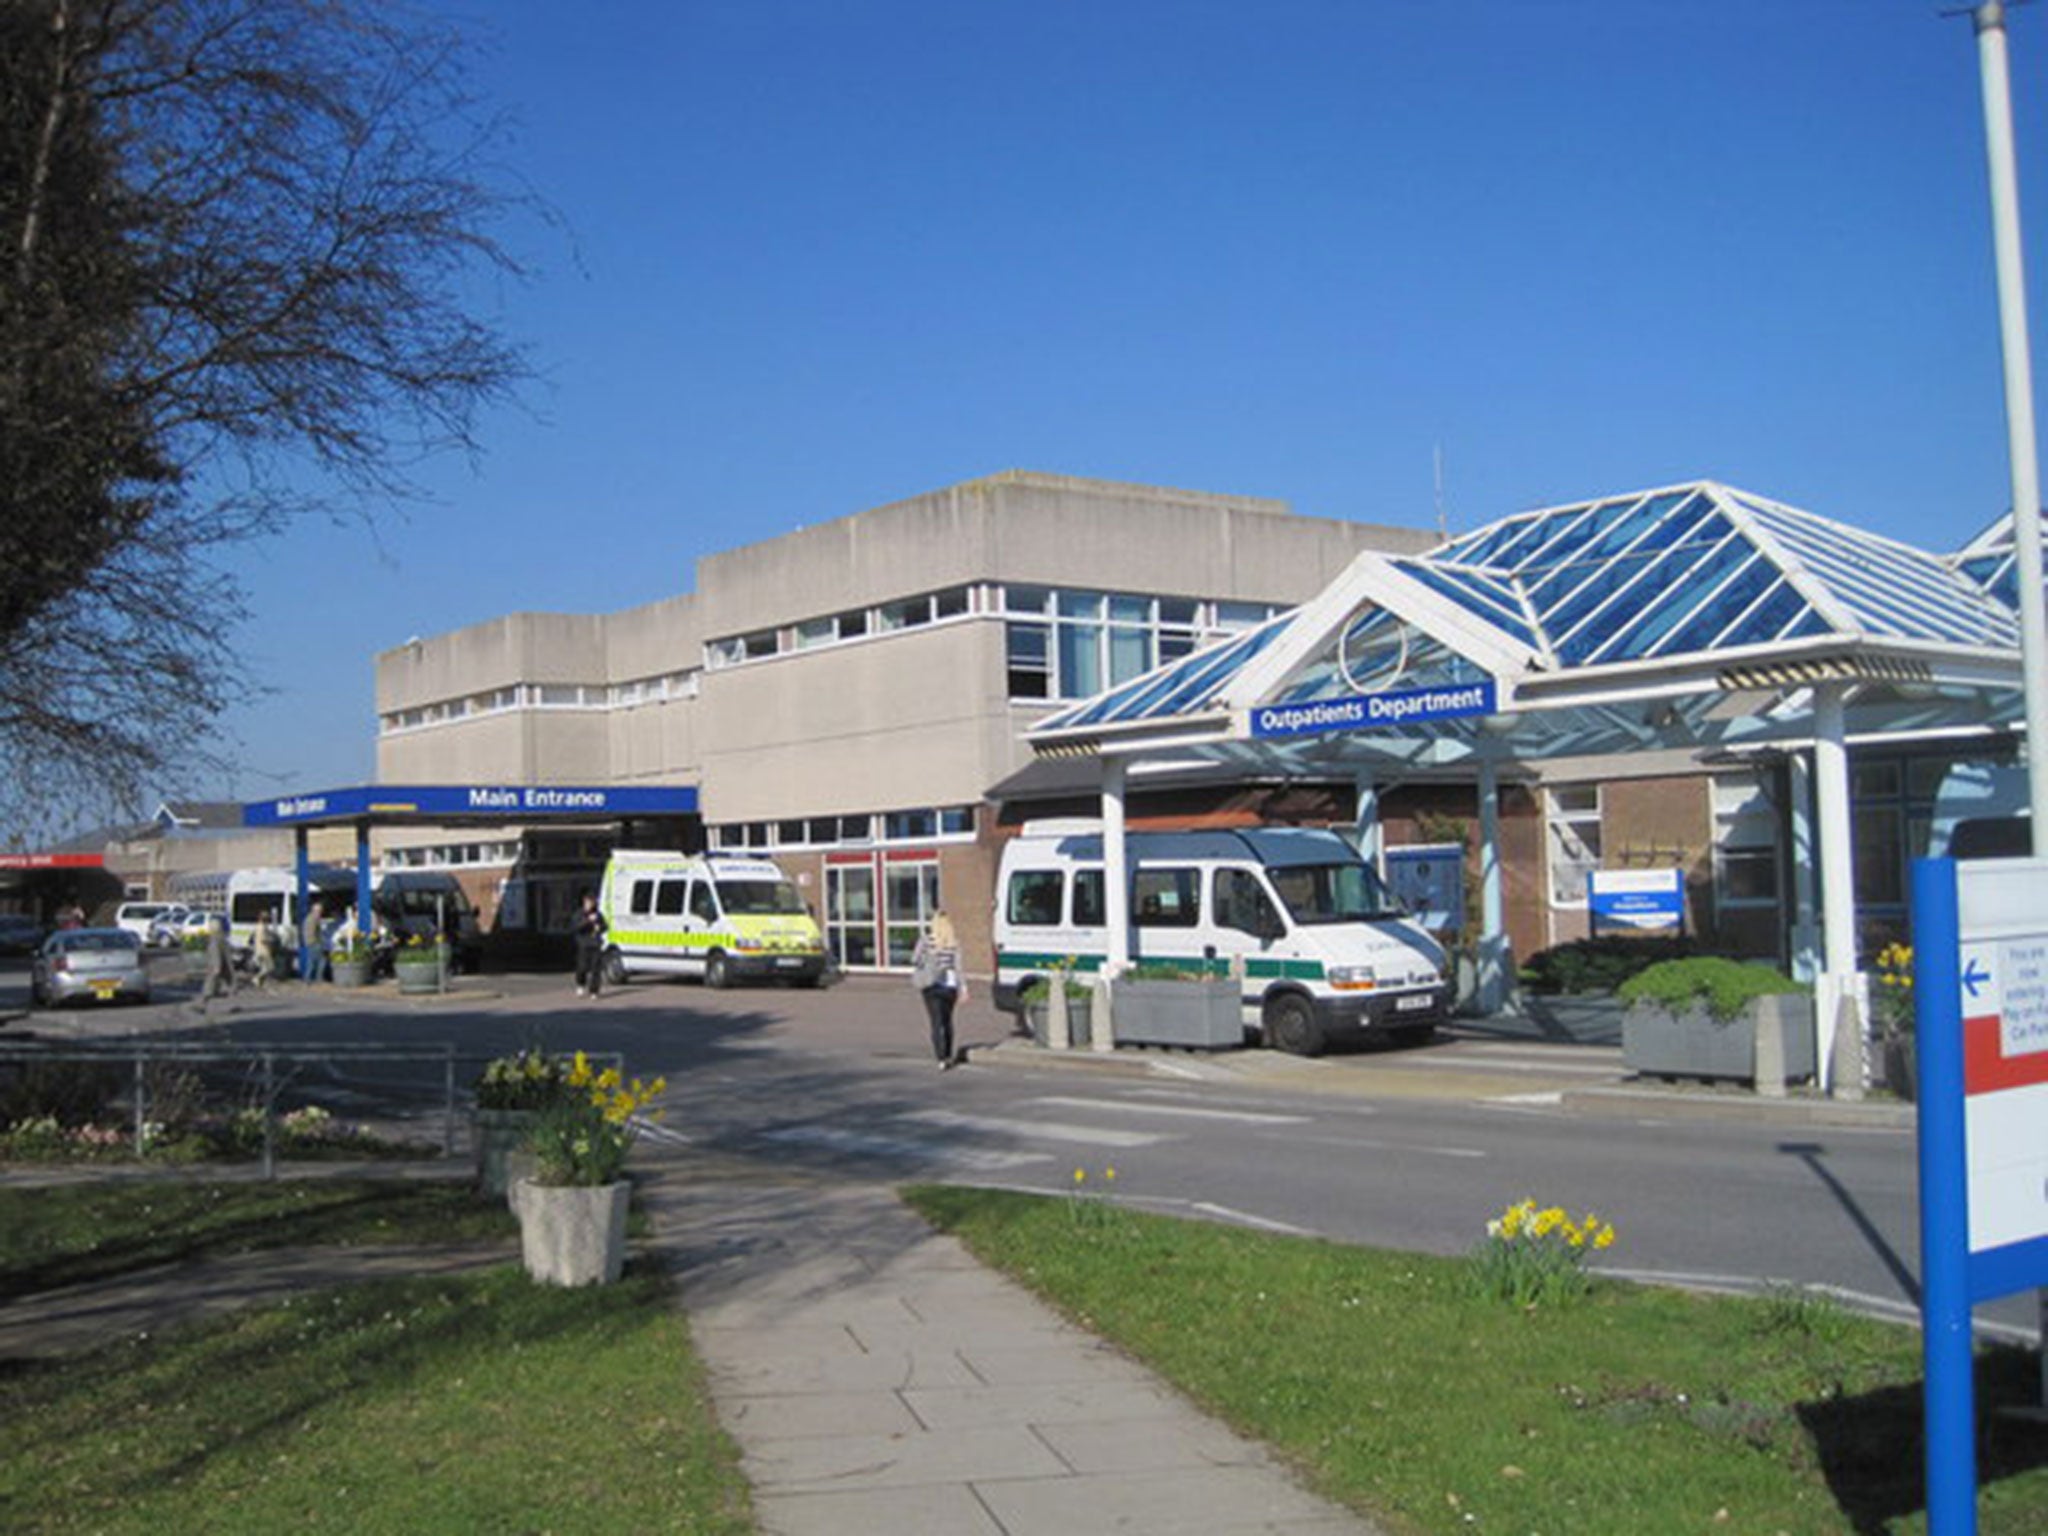 The two men, both in their 40s and from outside of Sussex, were airlifted to Eastbourne District General Hospital, where they were pronounced dead.